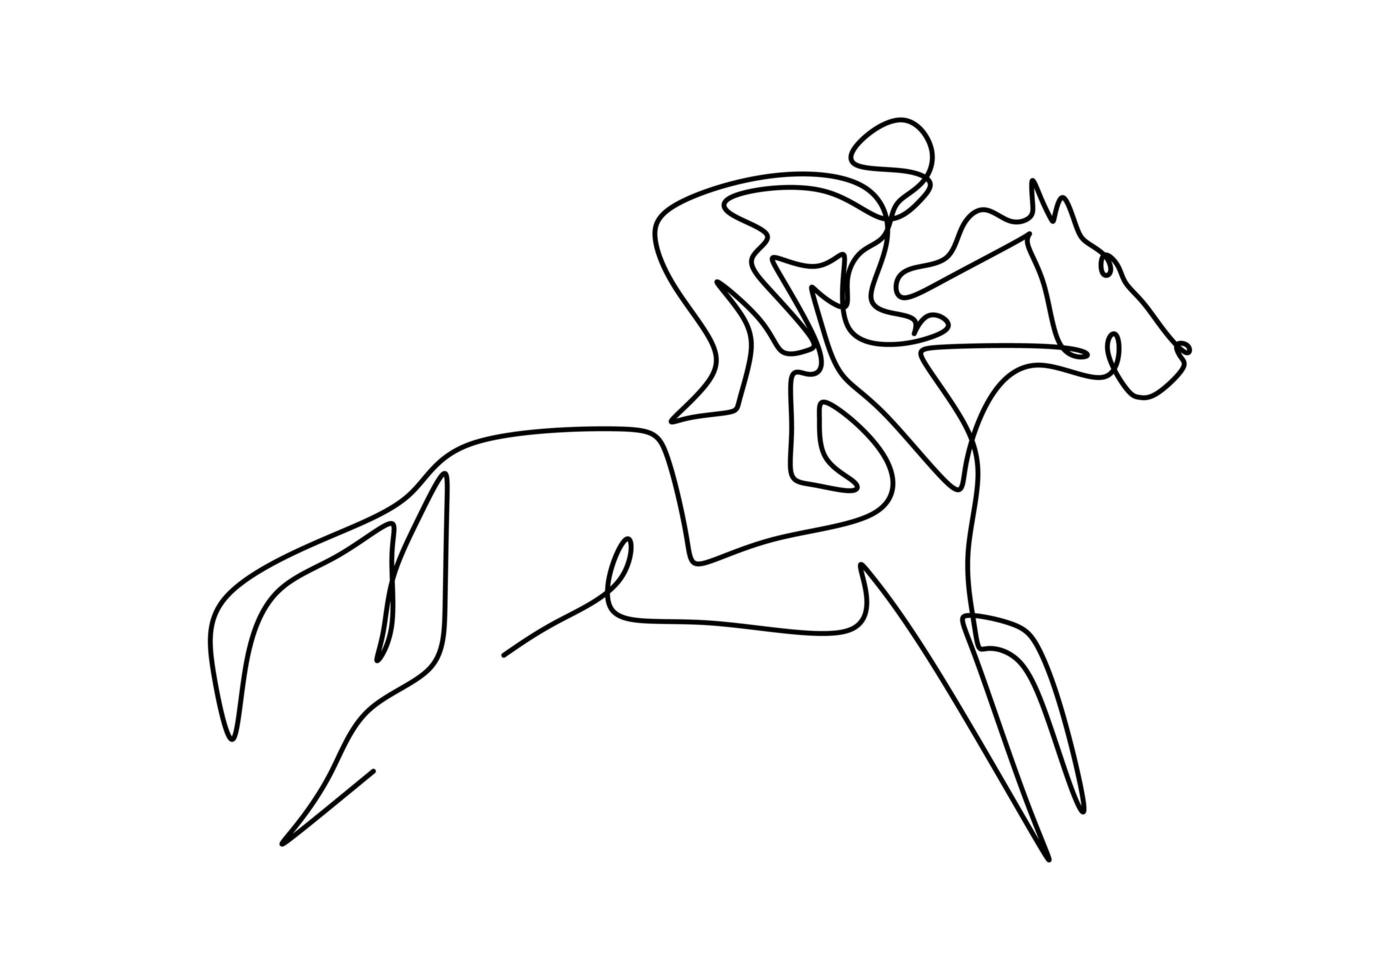 Continuous one line drawing rider on horseback. Young horse rider man in jumping action. Equine training at racing track. Elegant sport. Equestrian sport show competition concept. Vector illustration